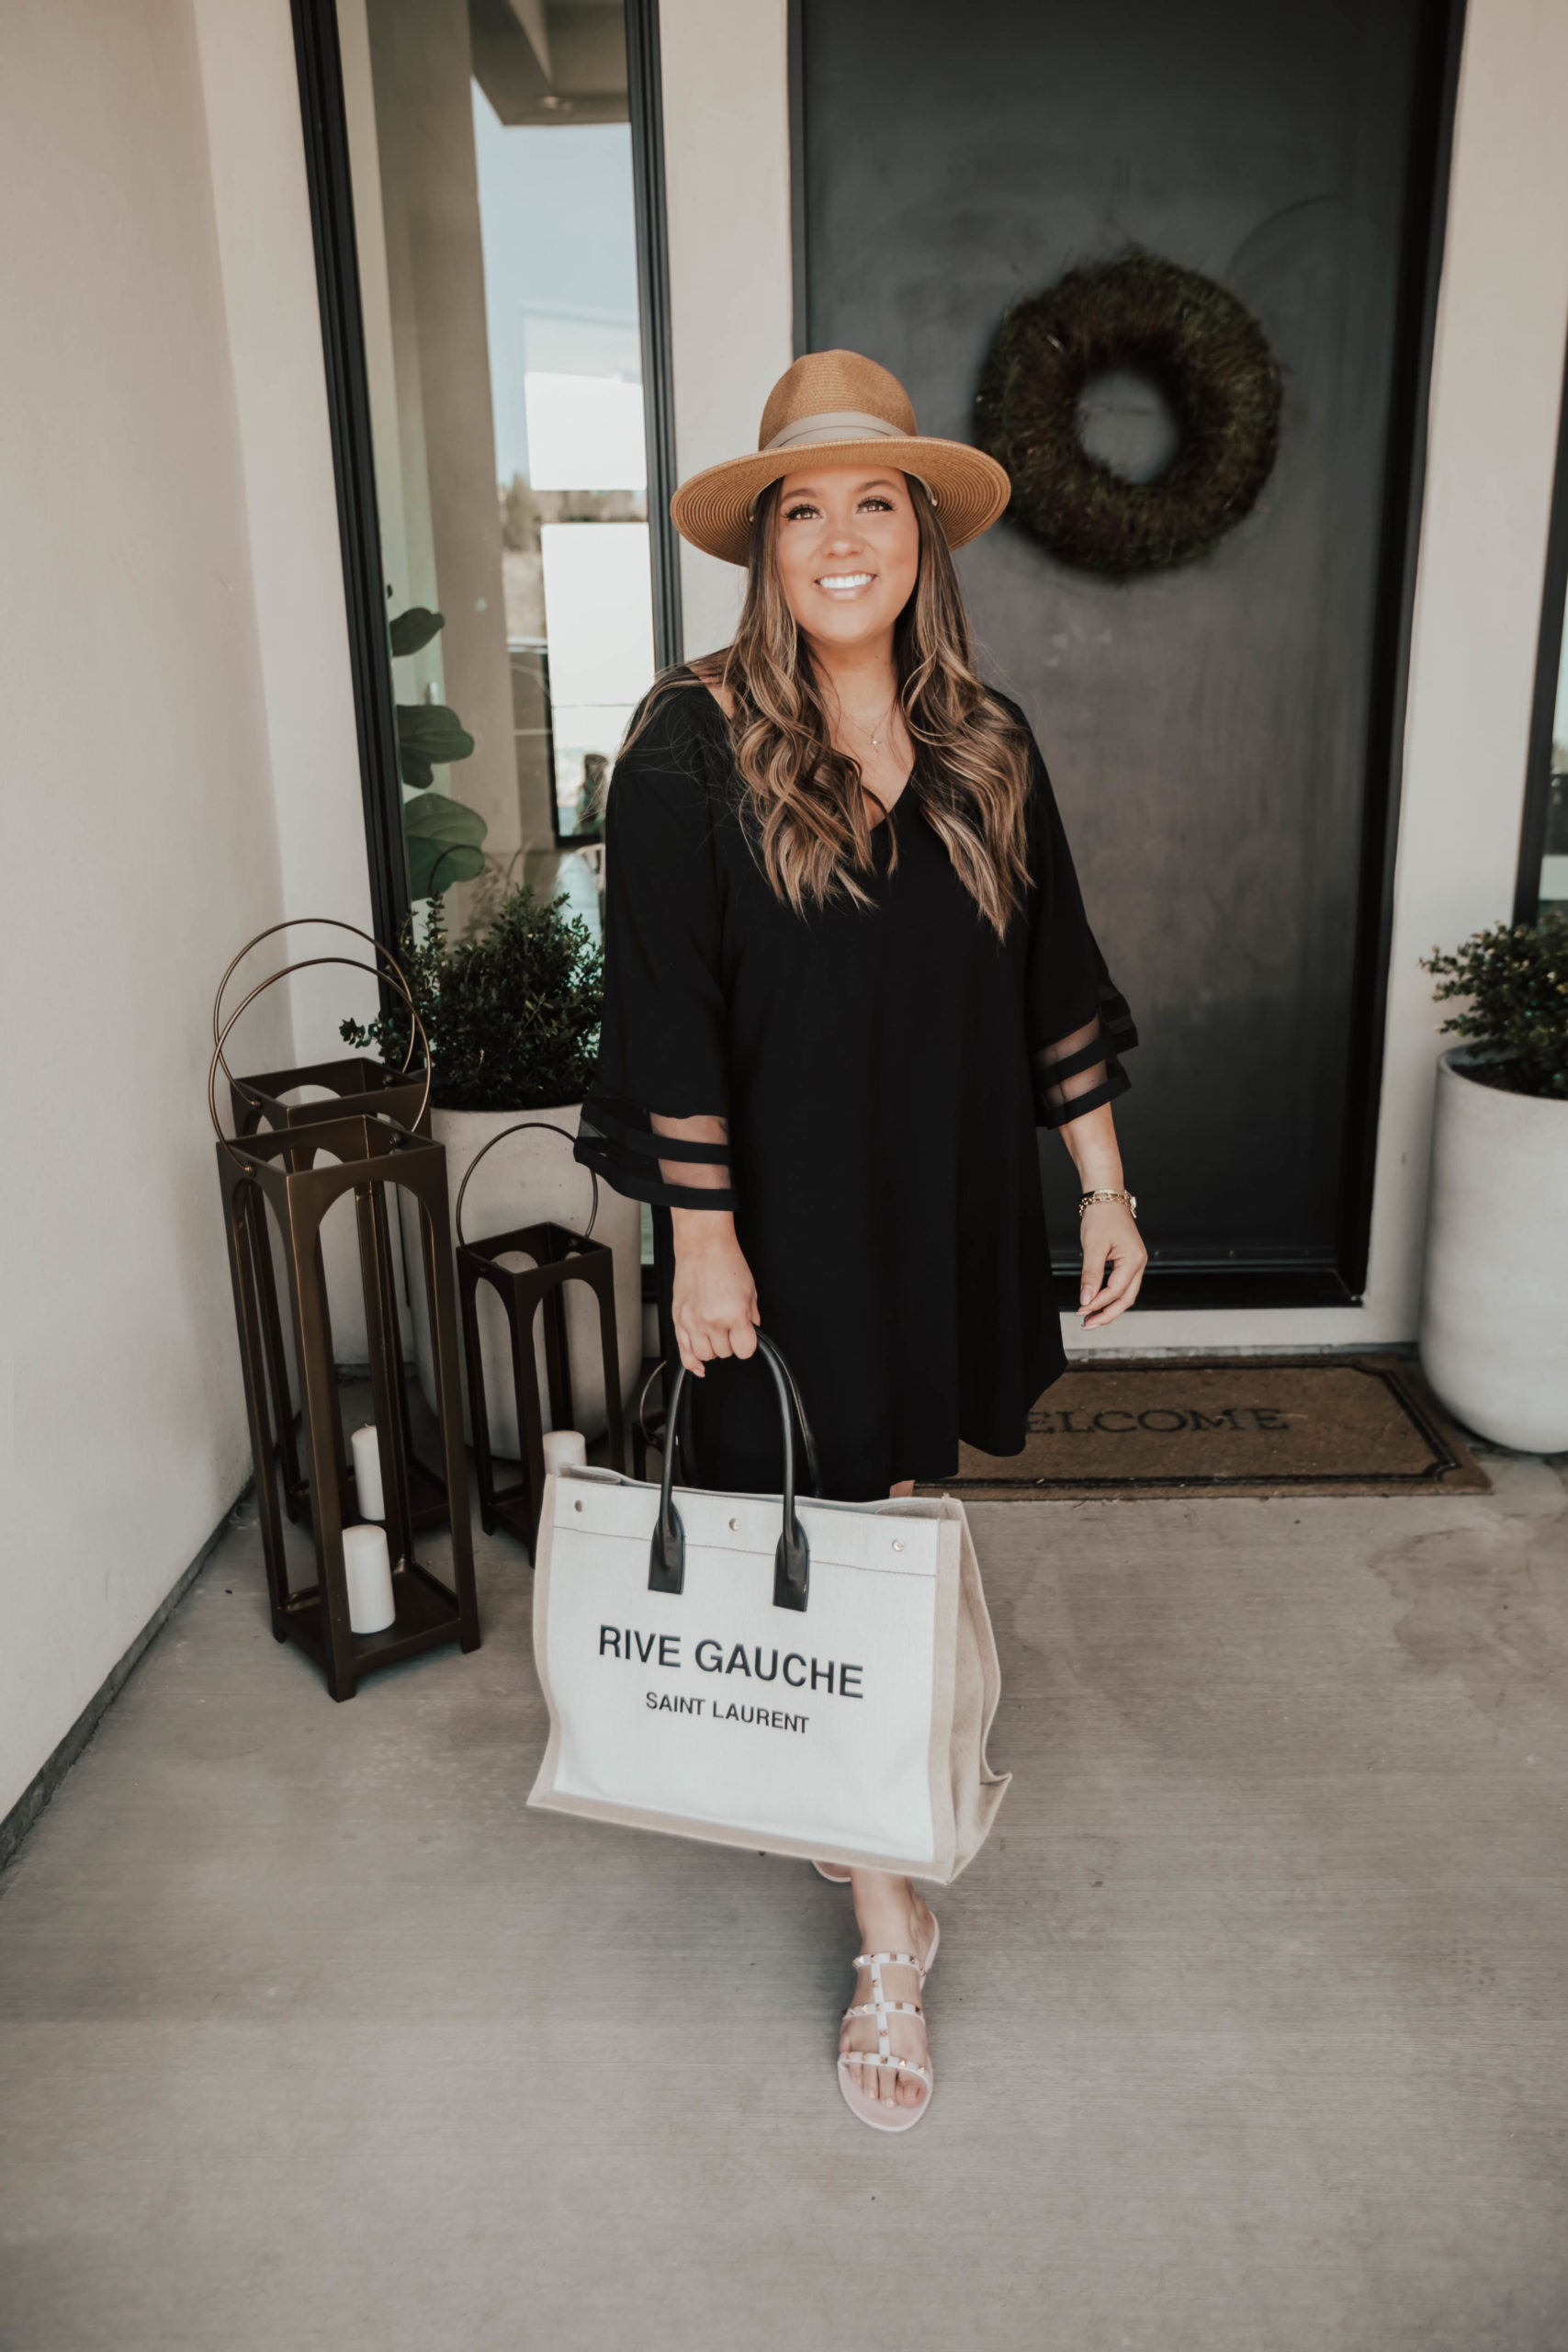 Reno blogger, Ashley Zeal Hurd, from the Ashley and Emily blog shares all of her Amazon Favorites March 2021.